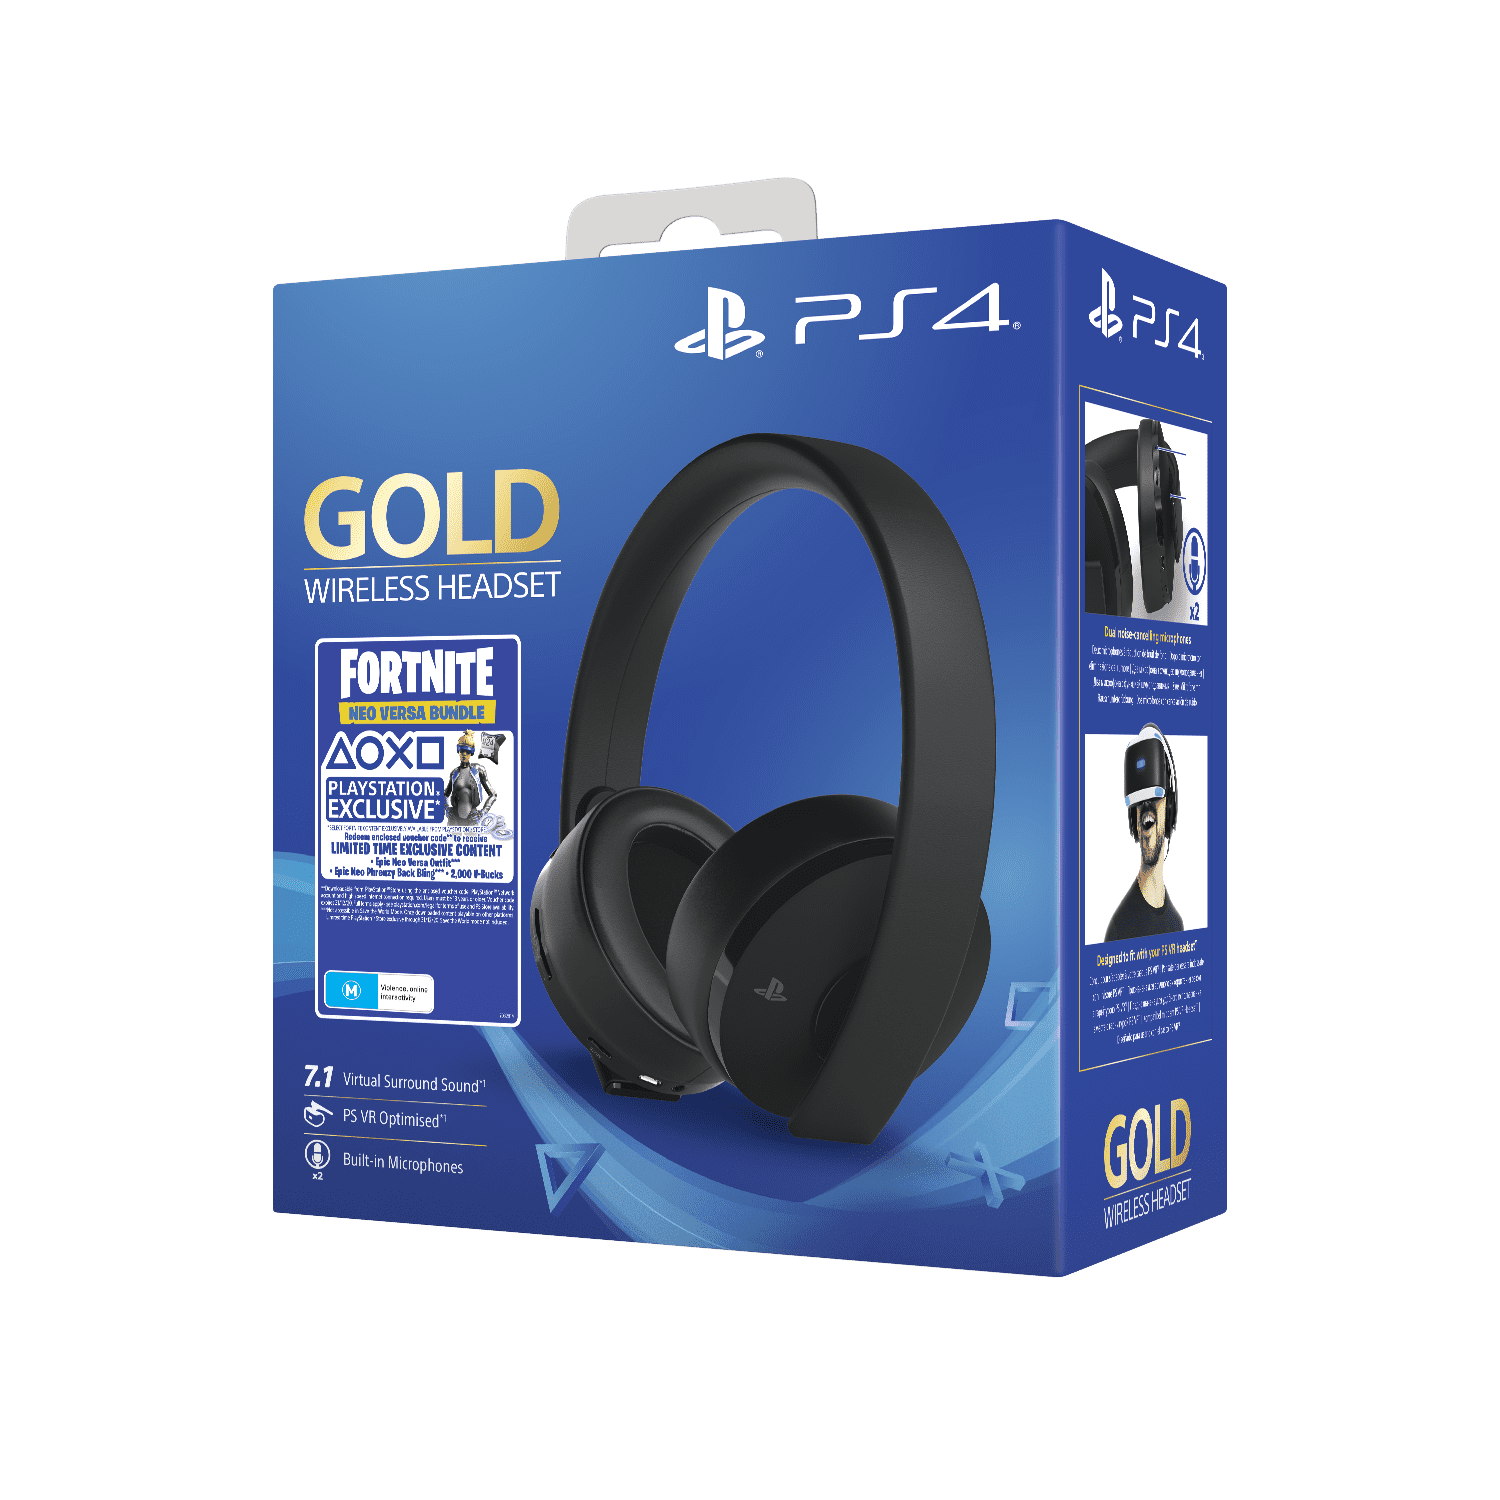 gold wireless headset ps4 price